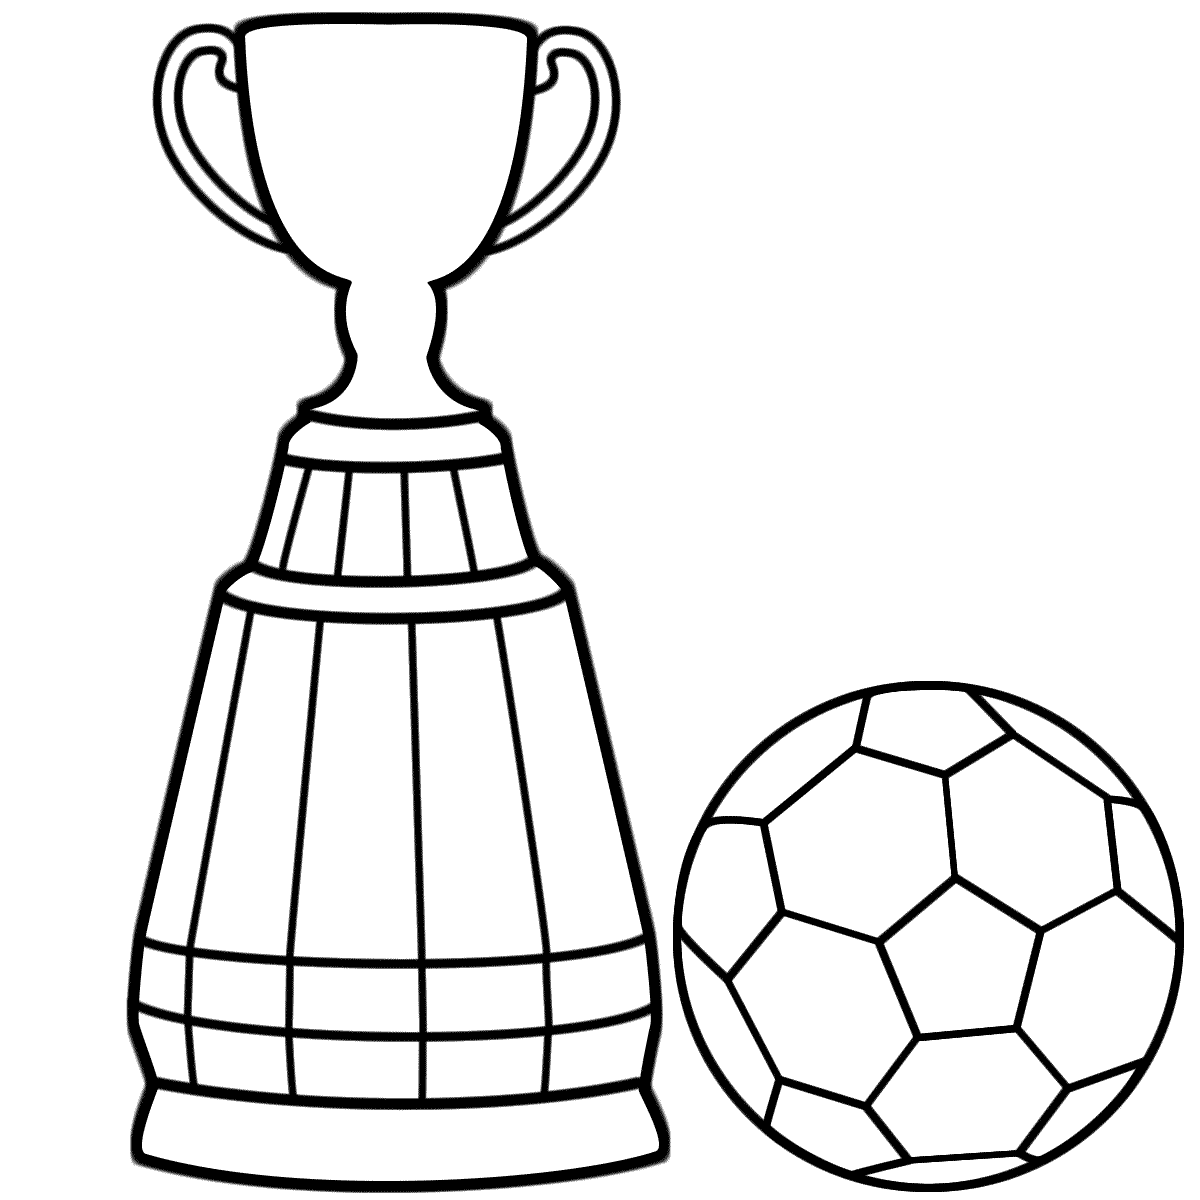 free-printable-soccer-coloring-pages-download-free-printable-soccer